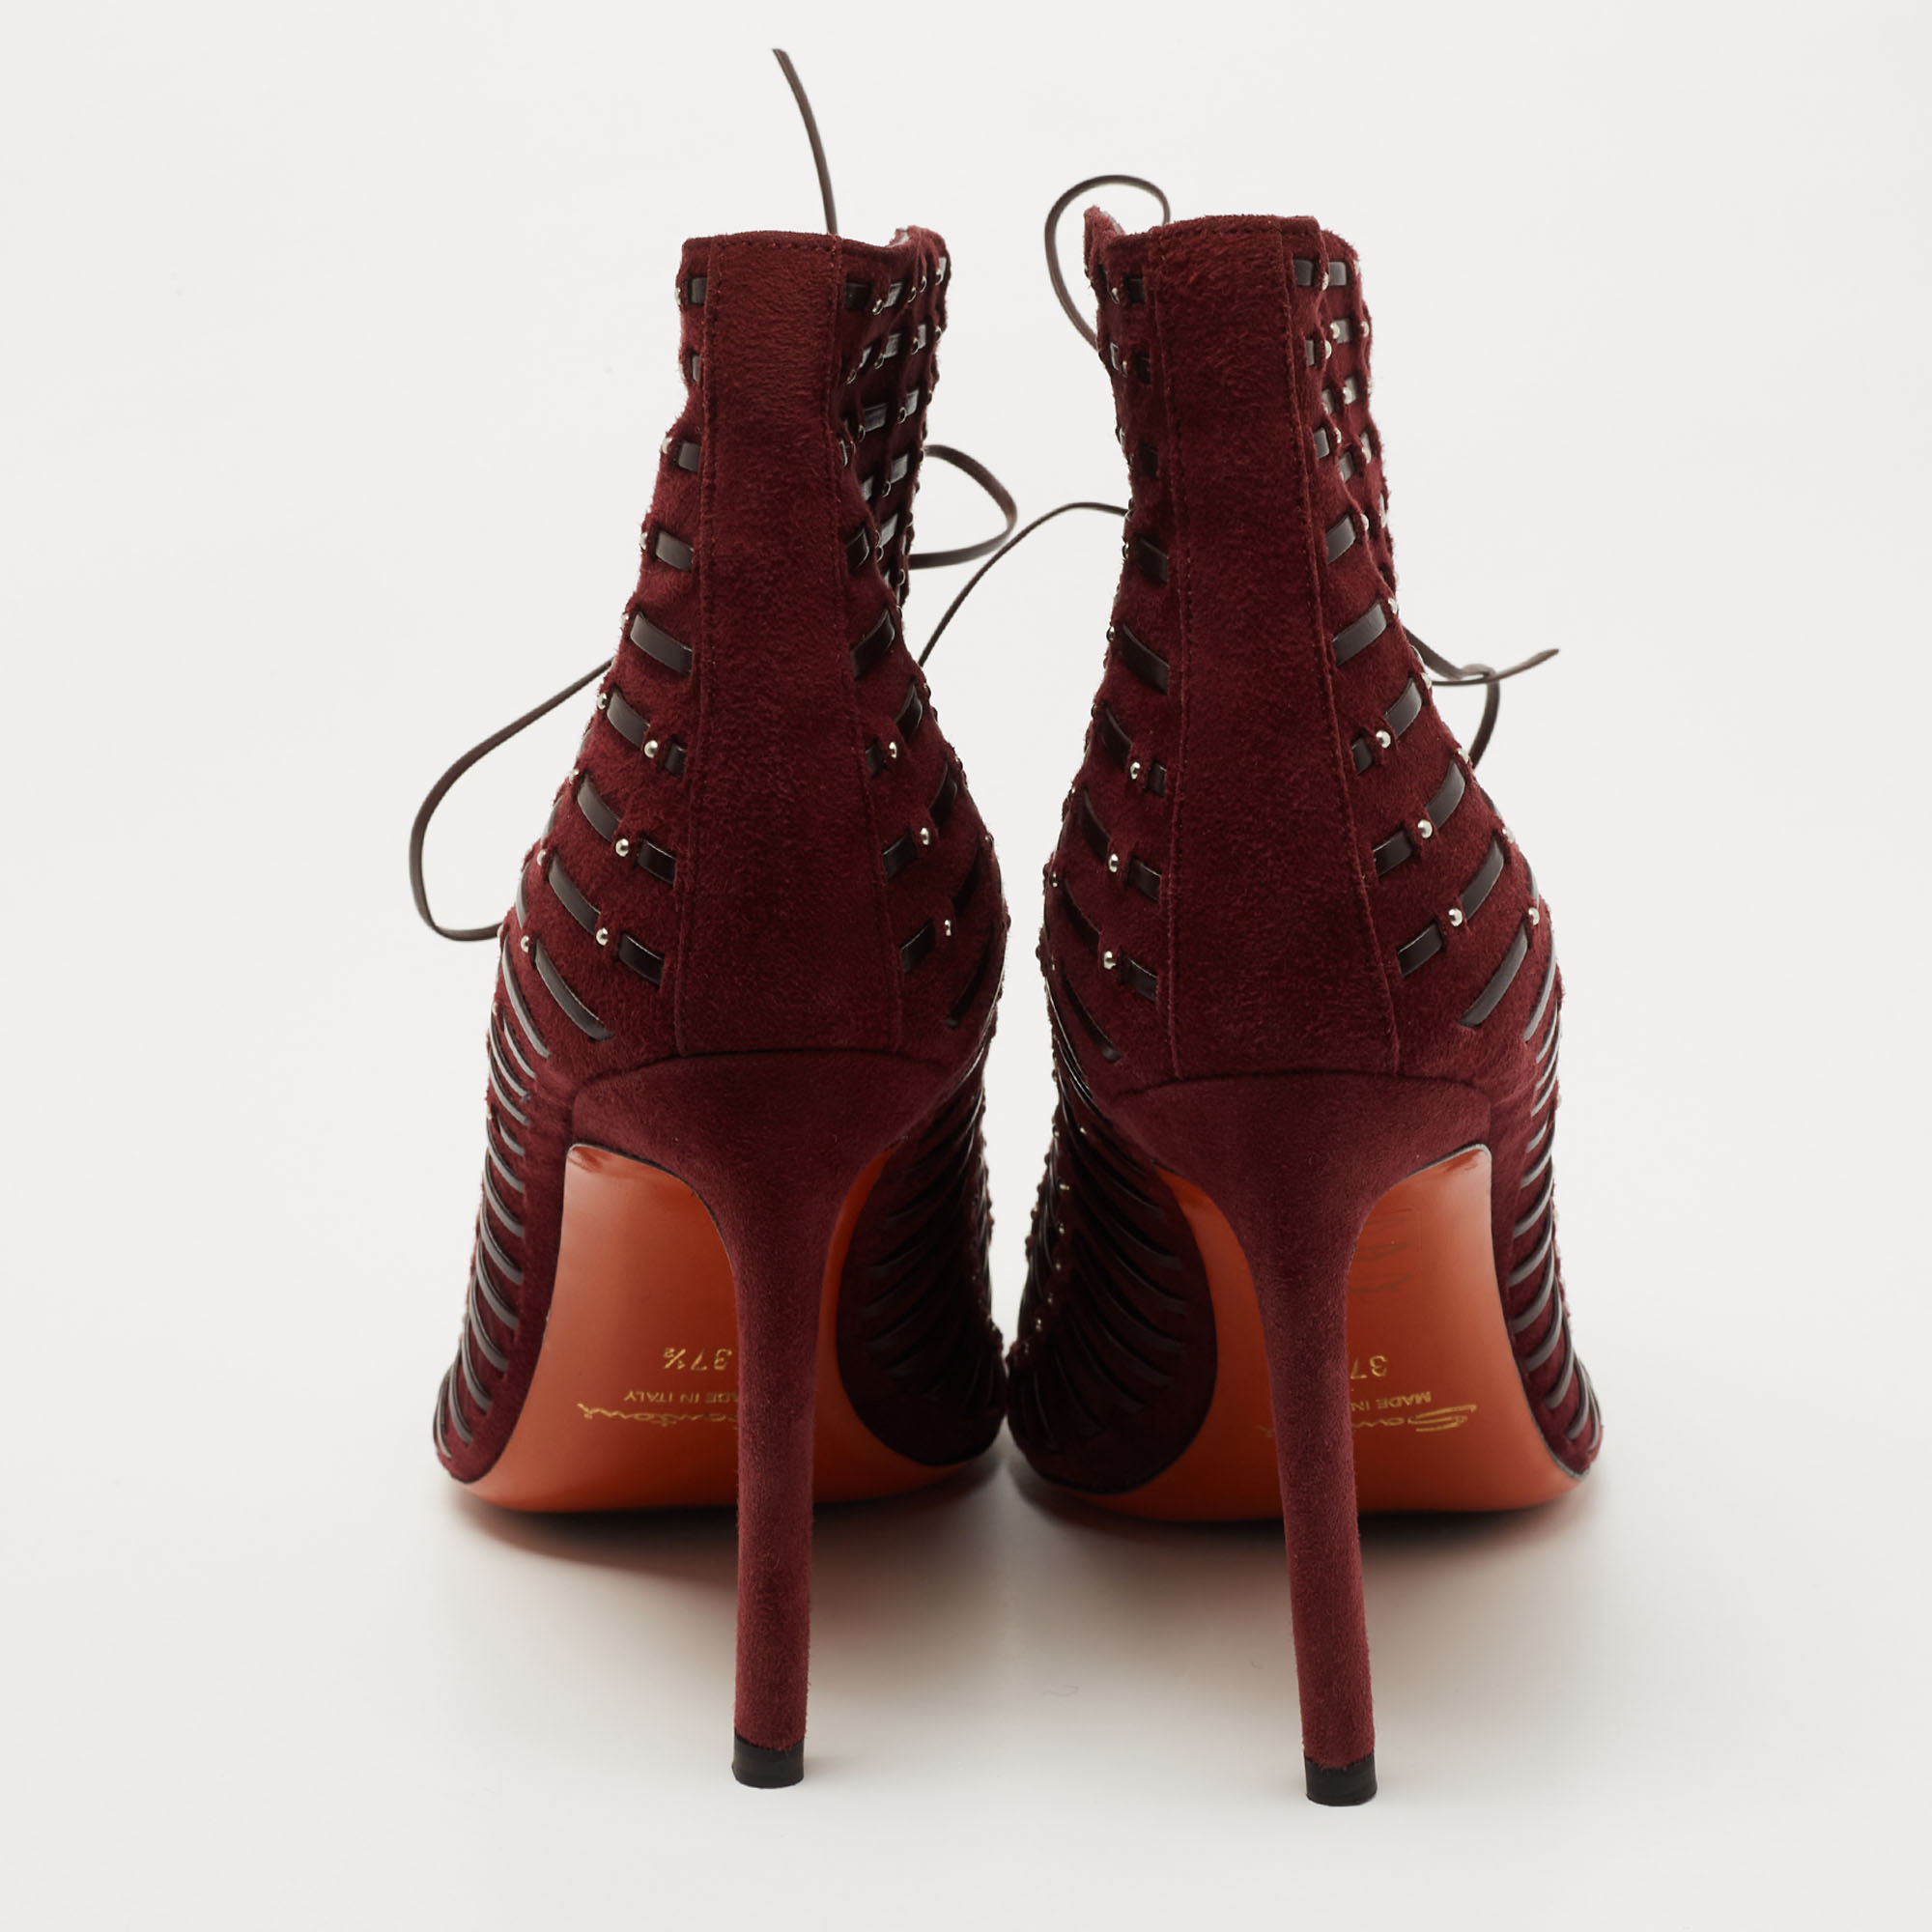 Santoni Burgundy Suede And Leather Peep Toe Lace Up Ankle Booties Size 37.5